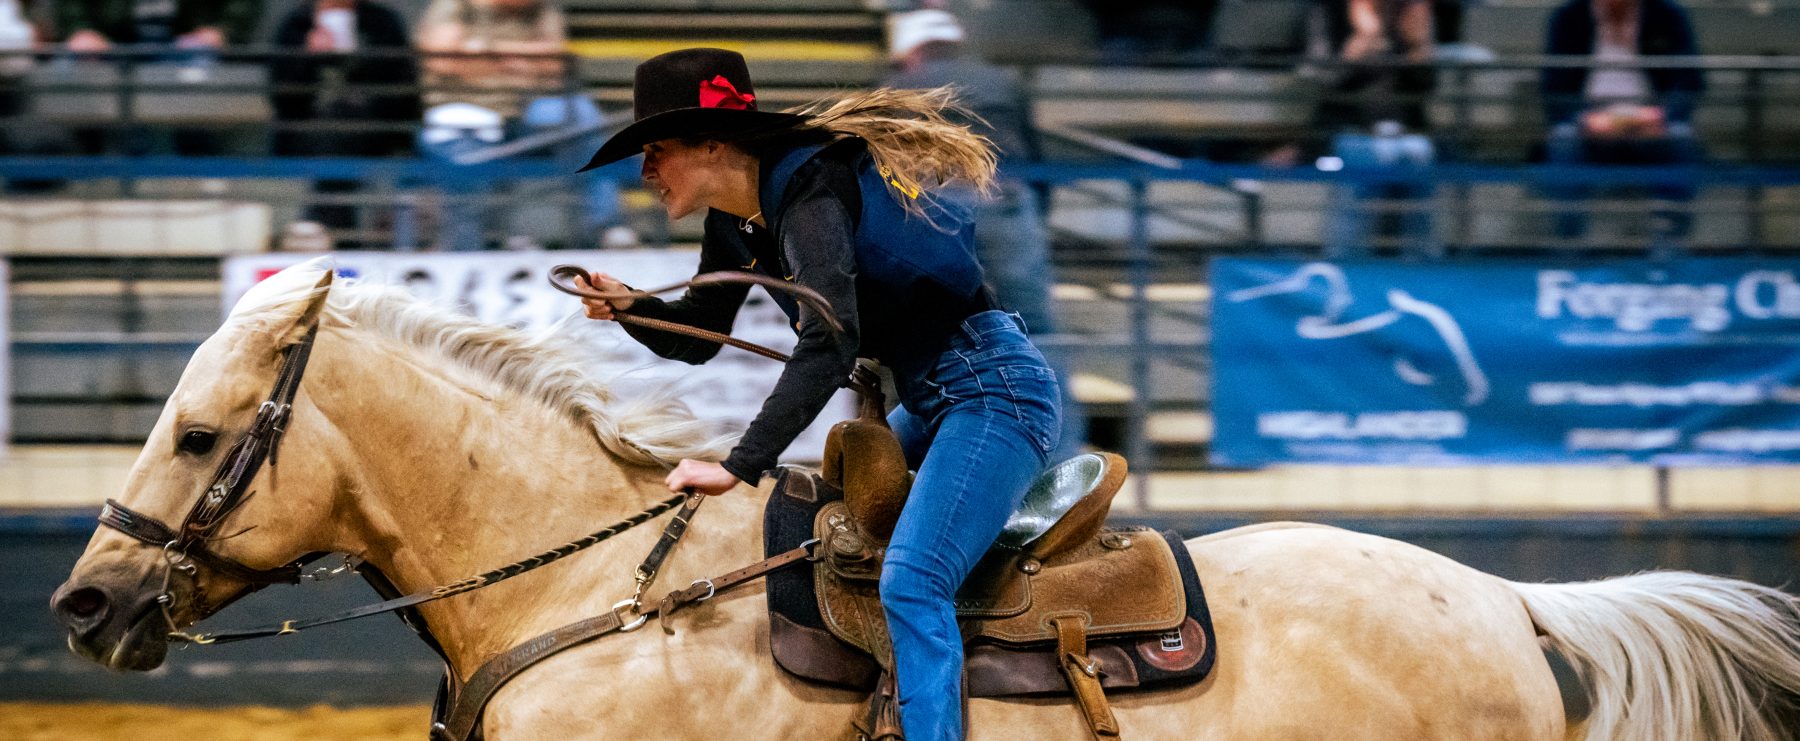 A person in western attire rides a horse during a rodeo competition.